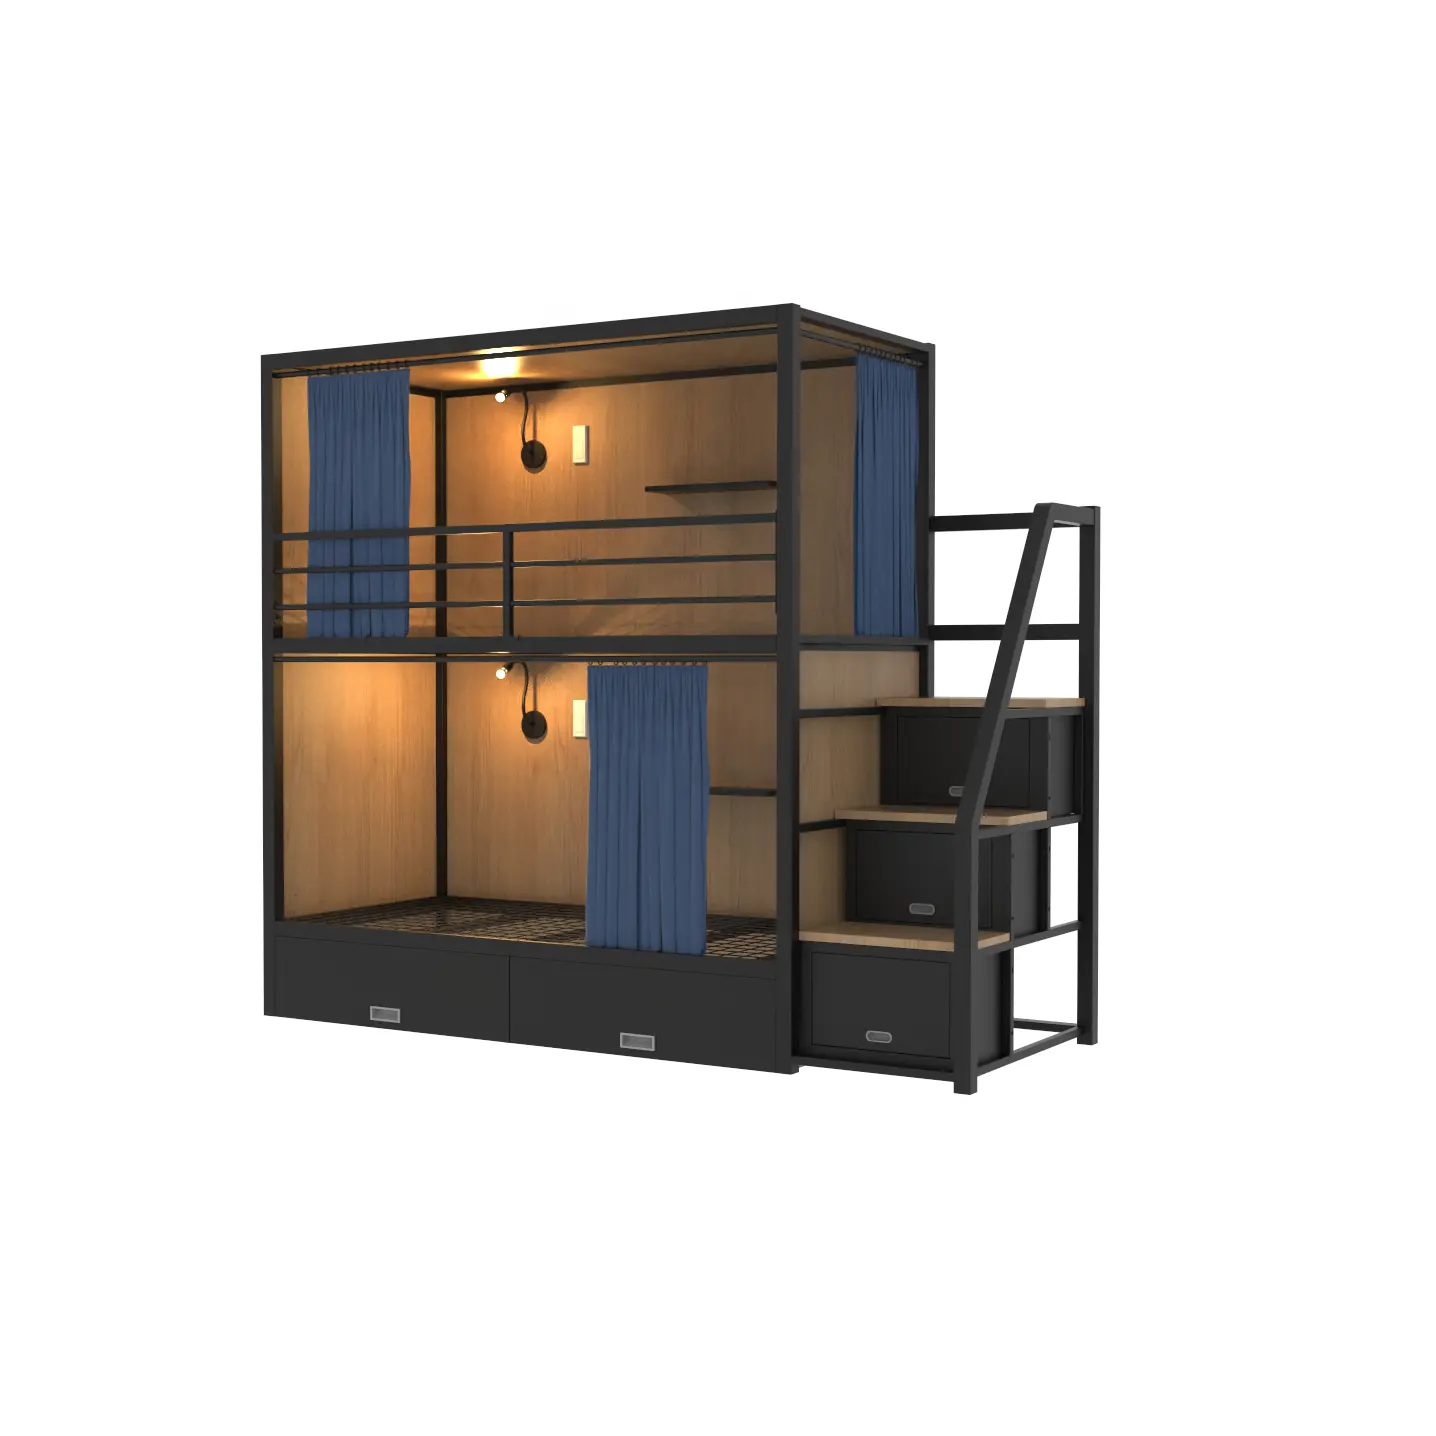 Modern Hostel Bedroom Furniture Bunk Bed Adult Double Capsule Bunk Bed With Stair And Lockers